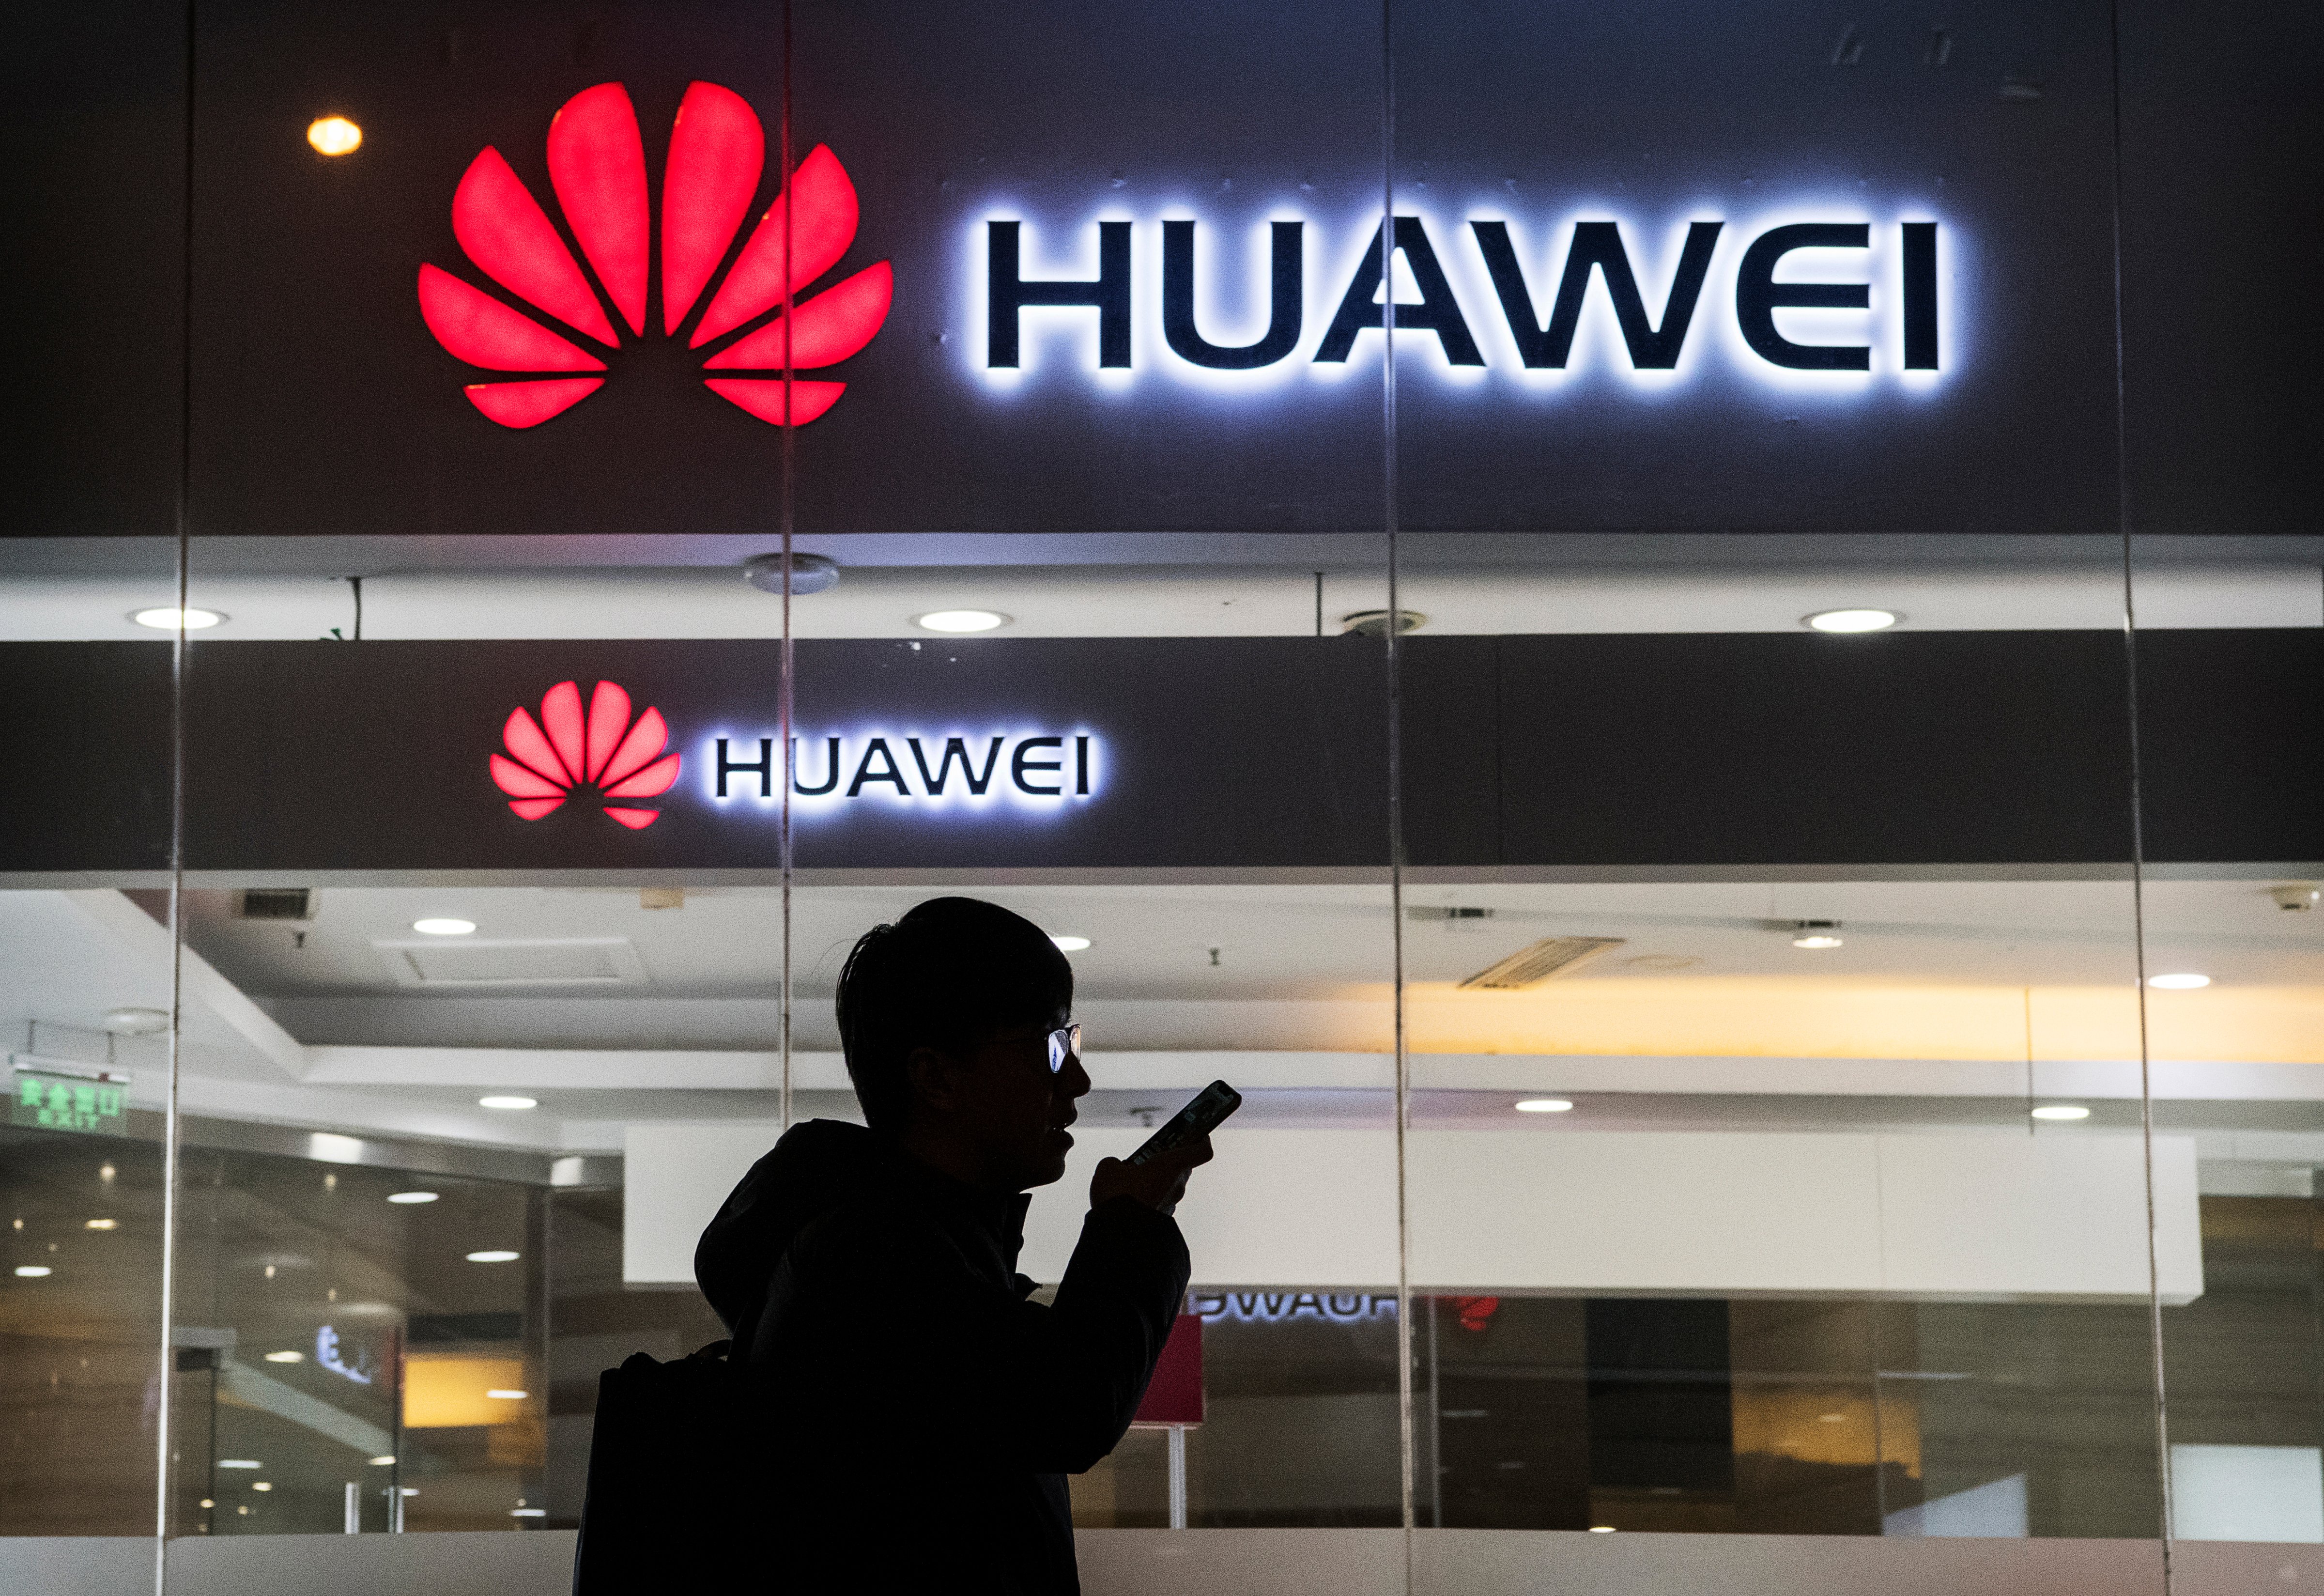 China's Telecom Giant Faces Criminal Charges in the U.S.